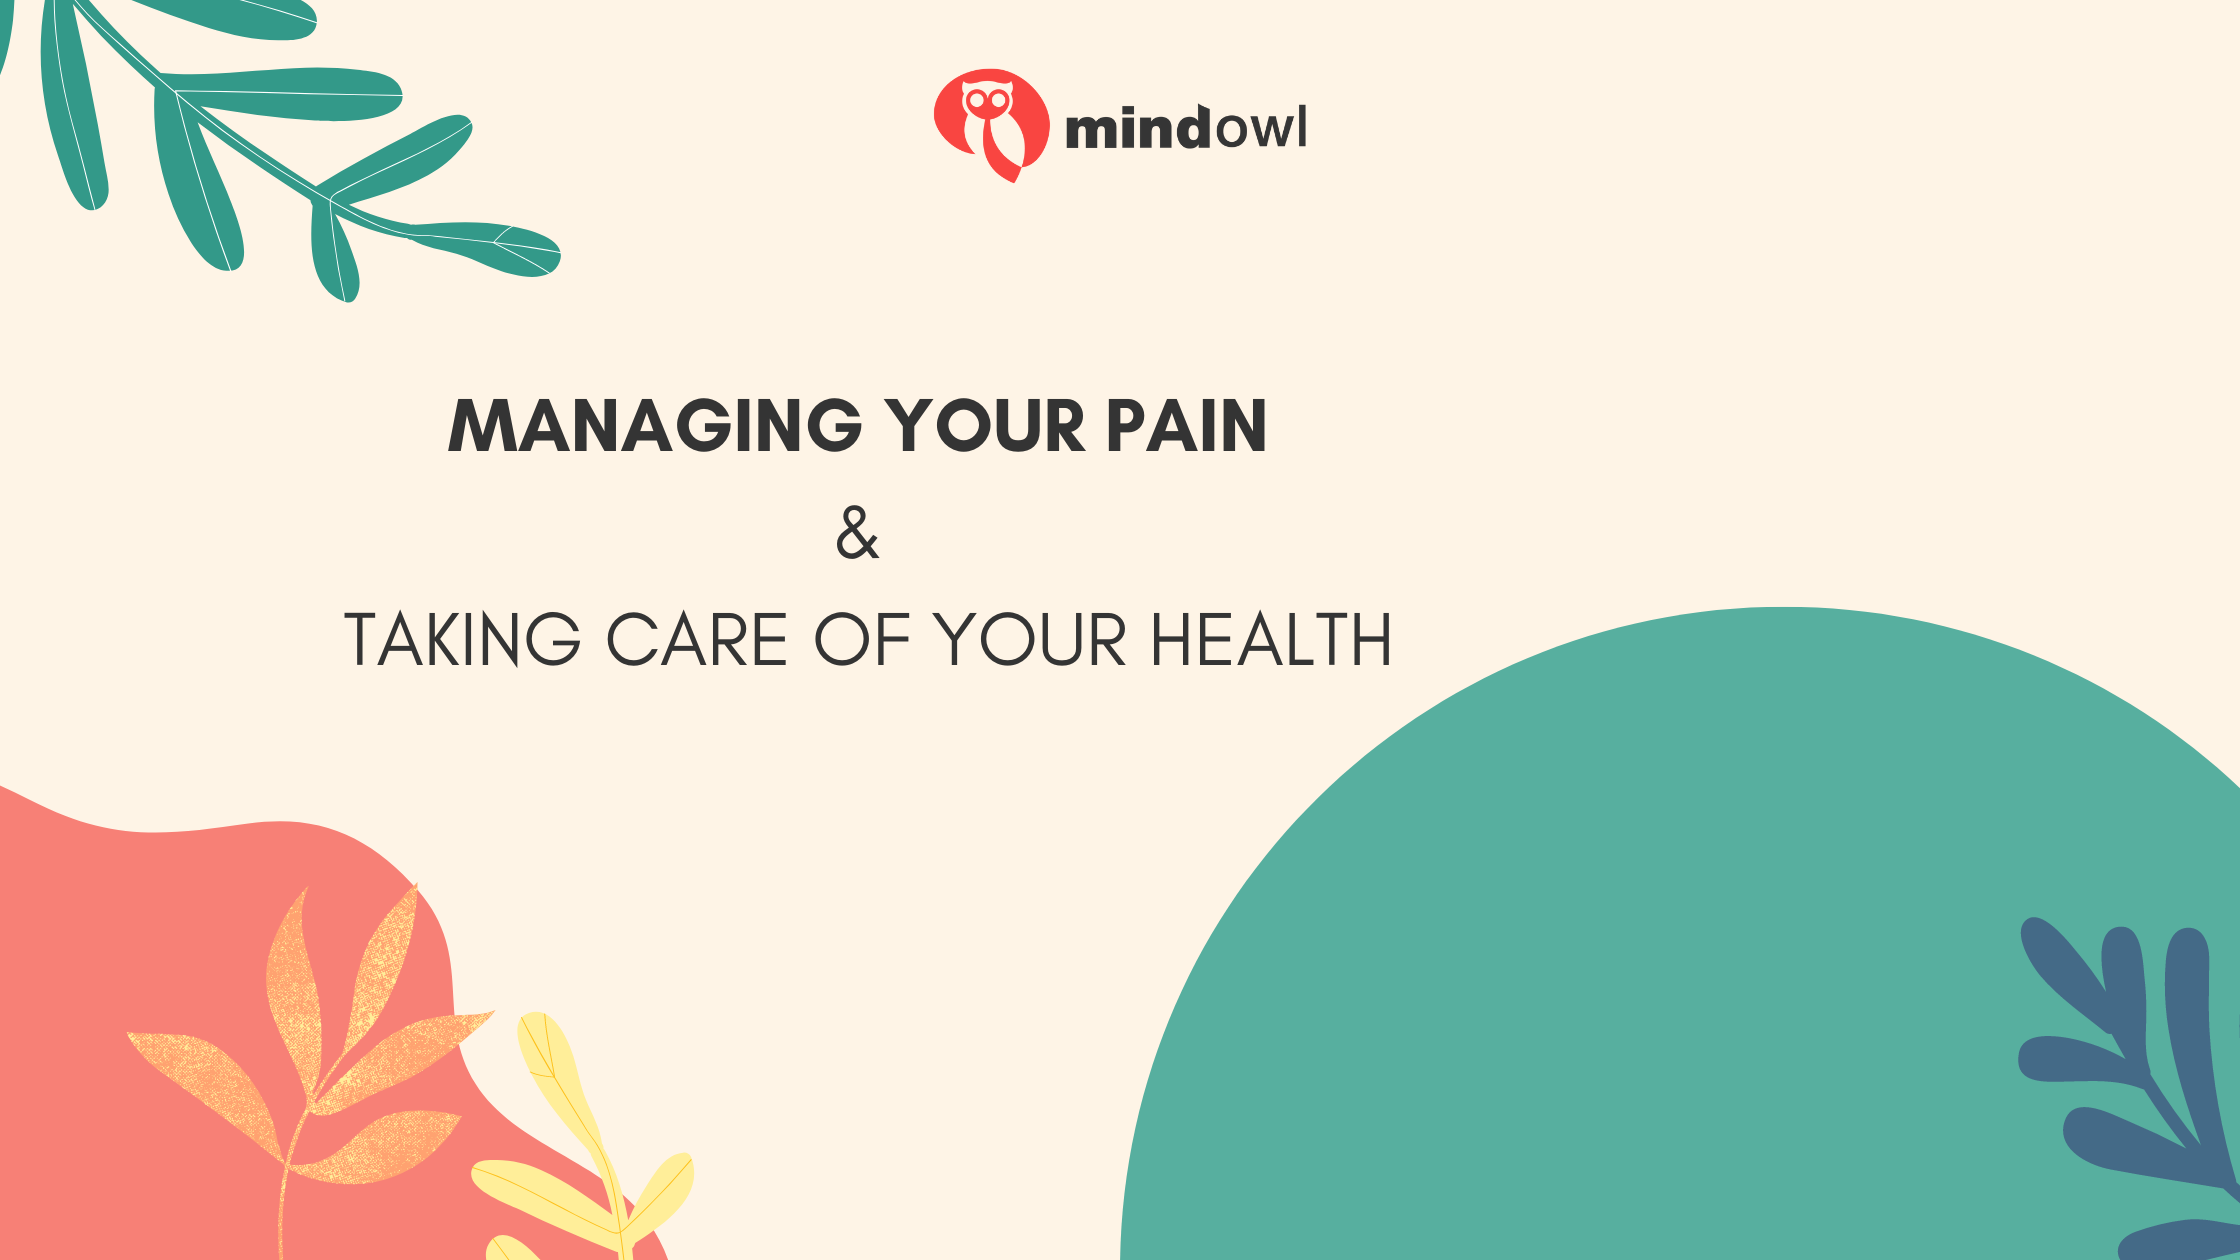 Managing Your Pain & Taking Care of Your Health: Key Tips to Follow